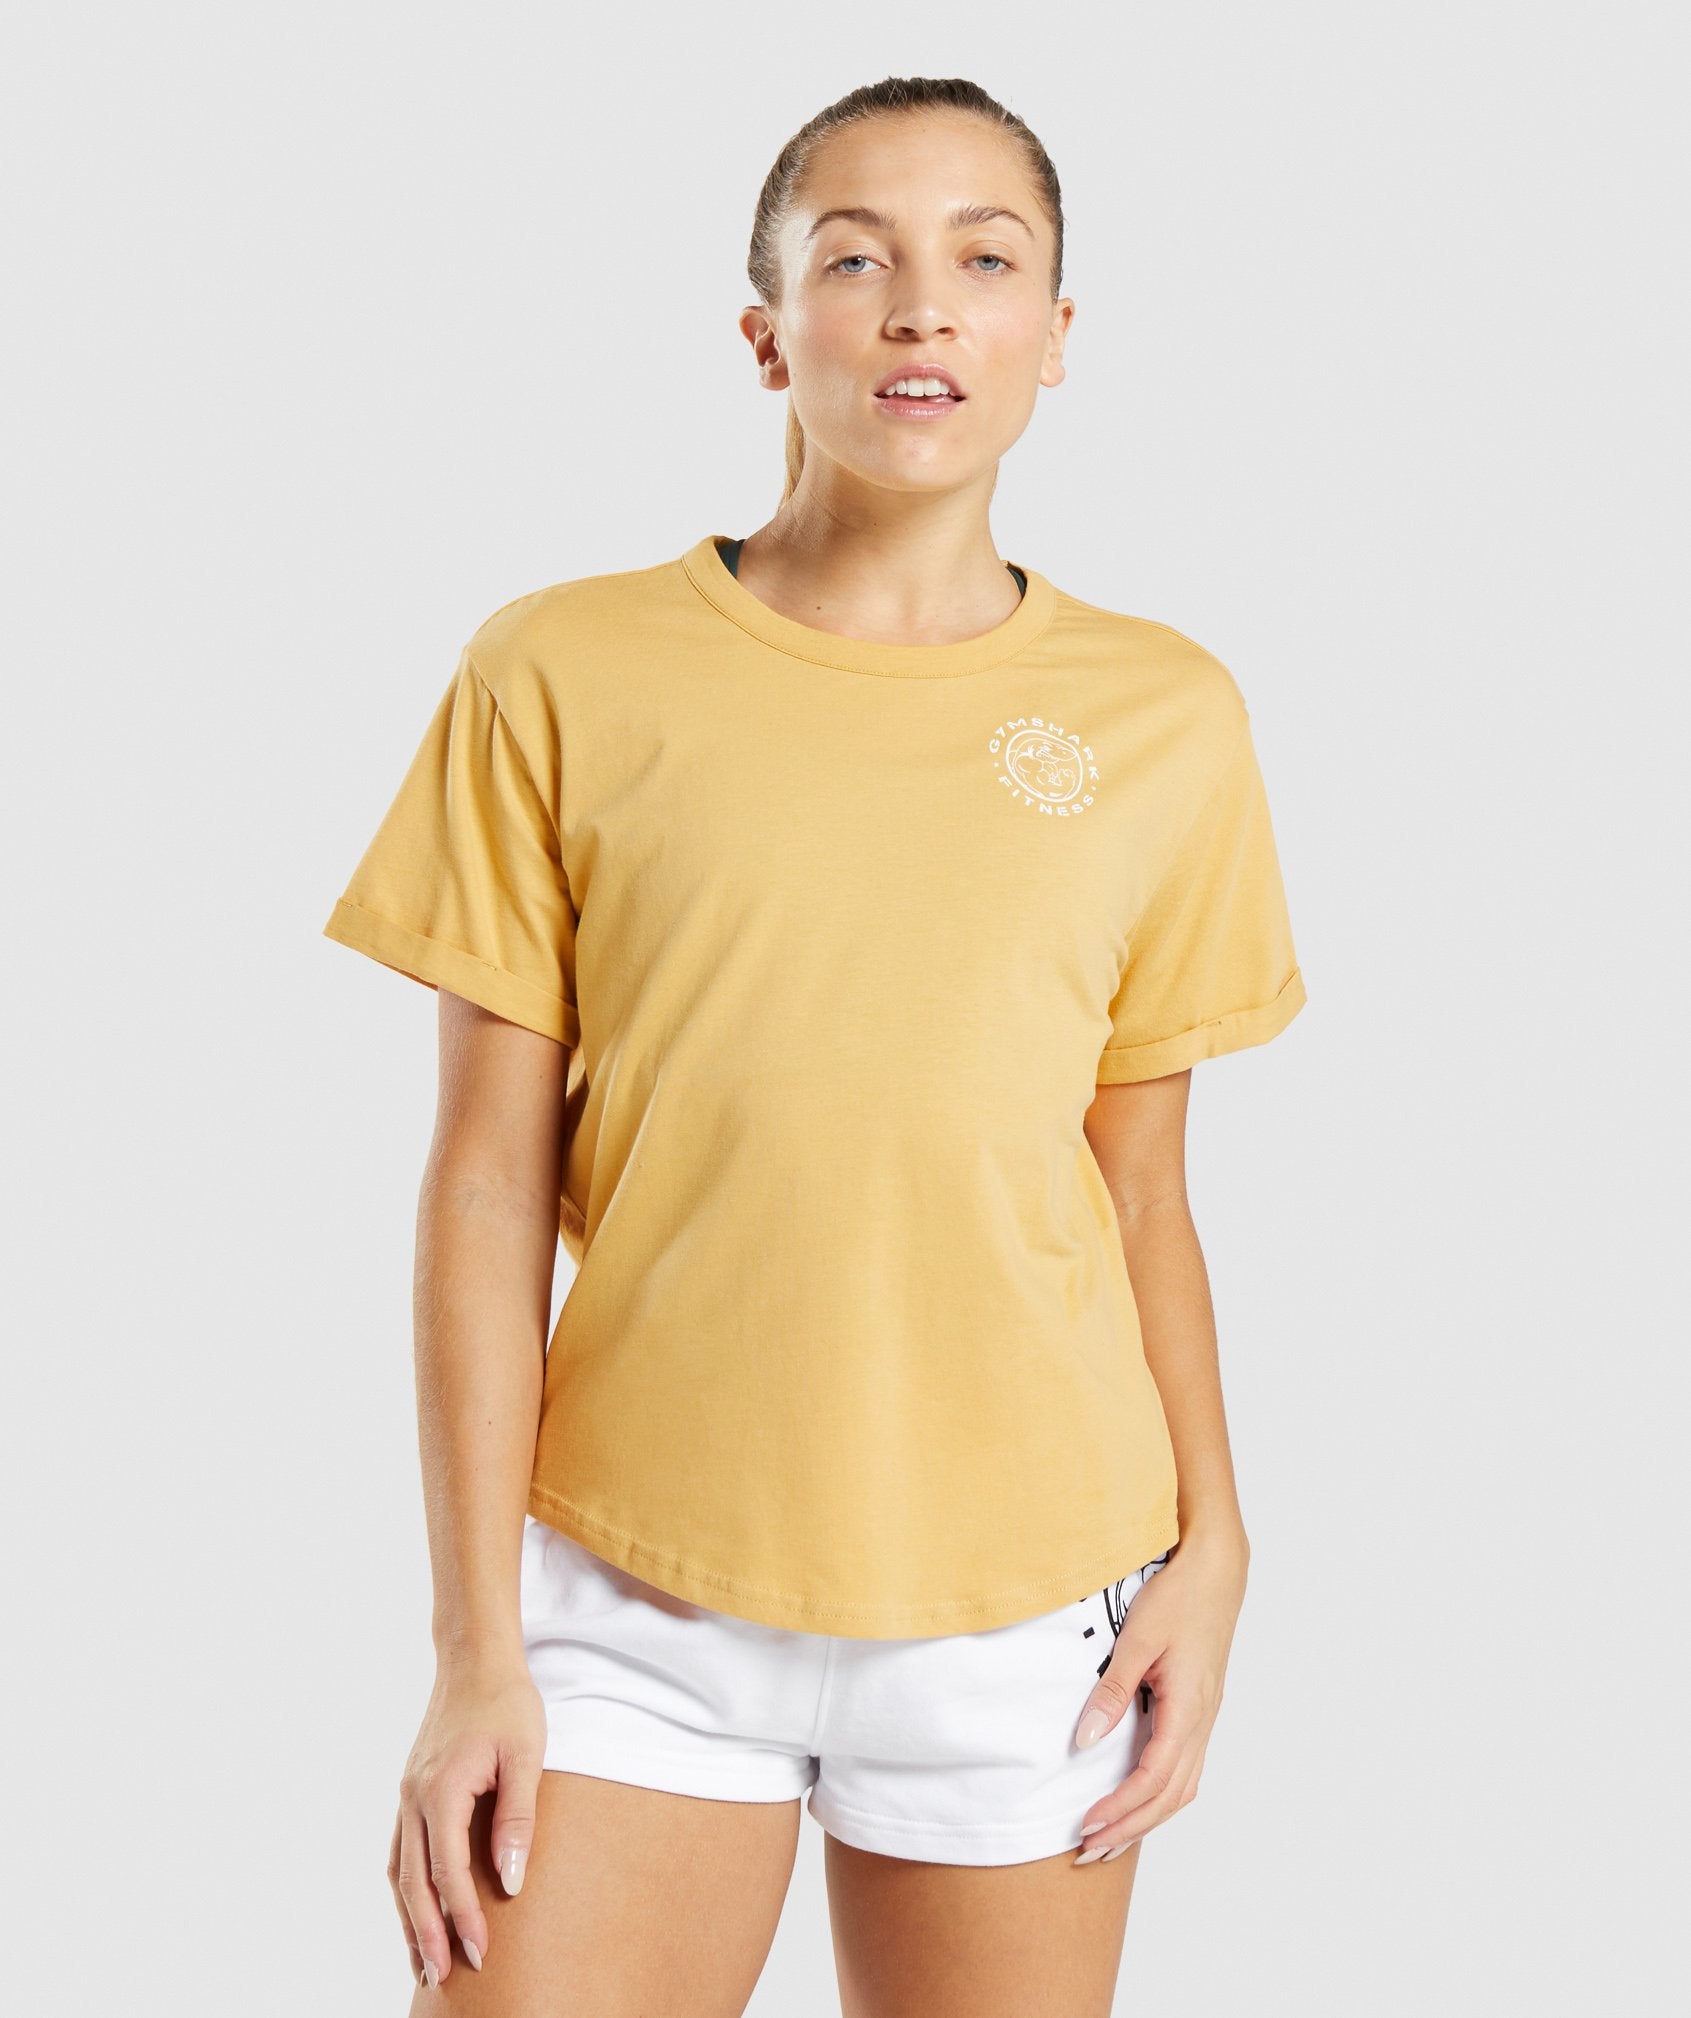 Legacy Graphic Tee in Yellow - view 1